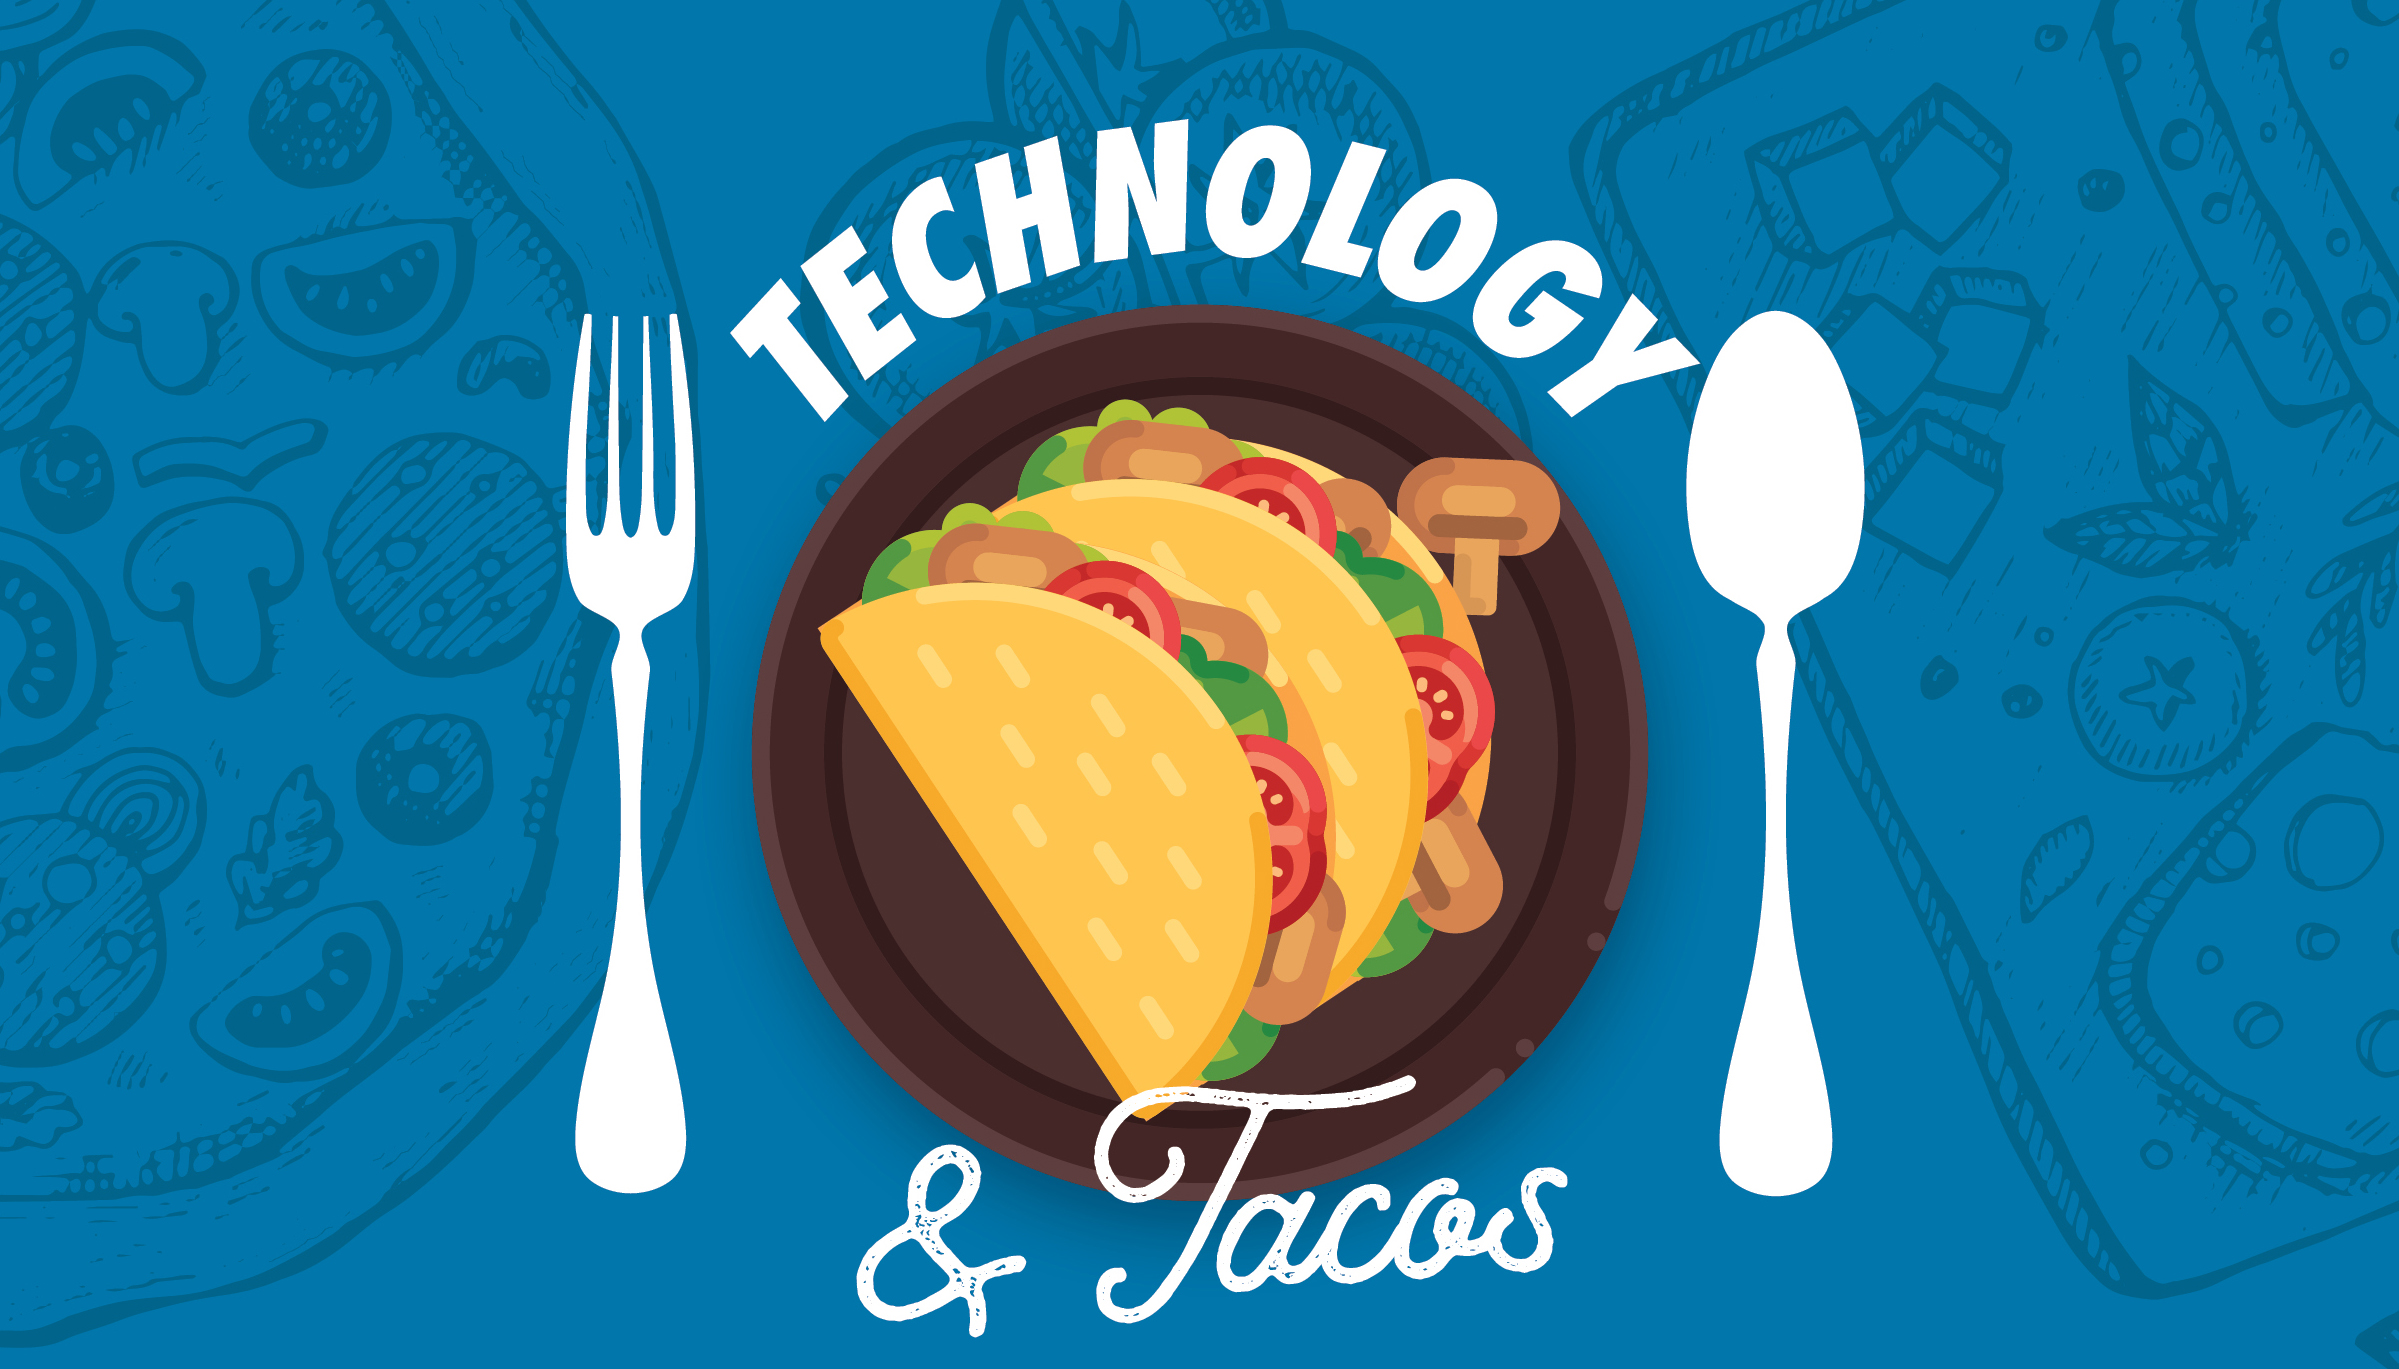 Technology & Tacos - A Lunchtime Workshop Series